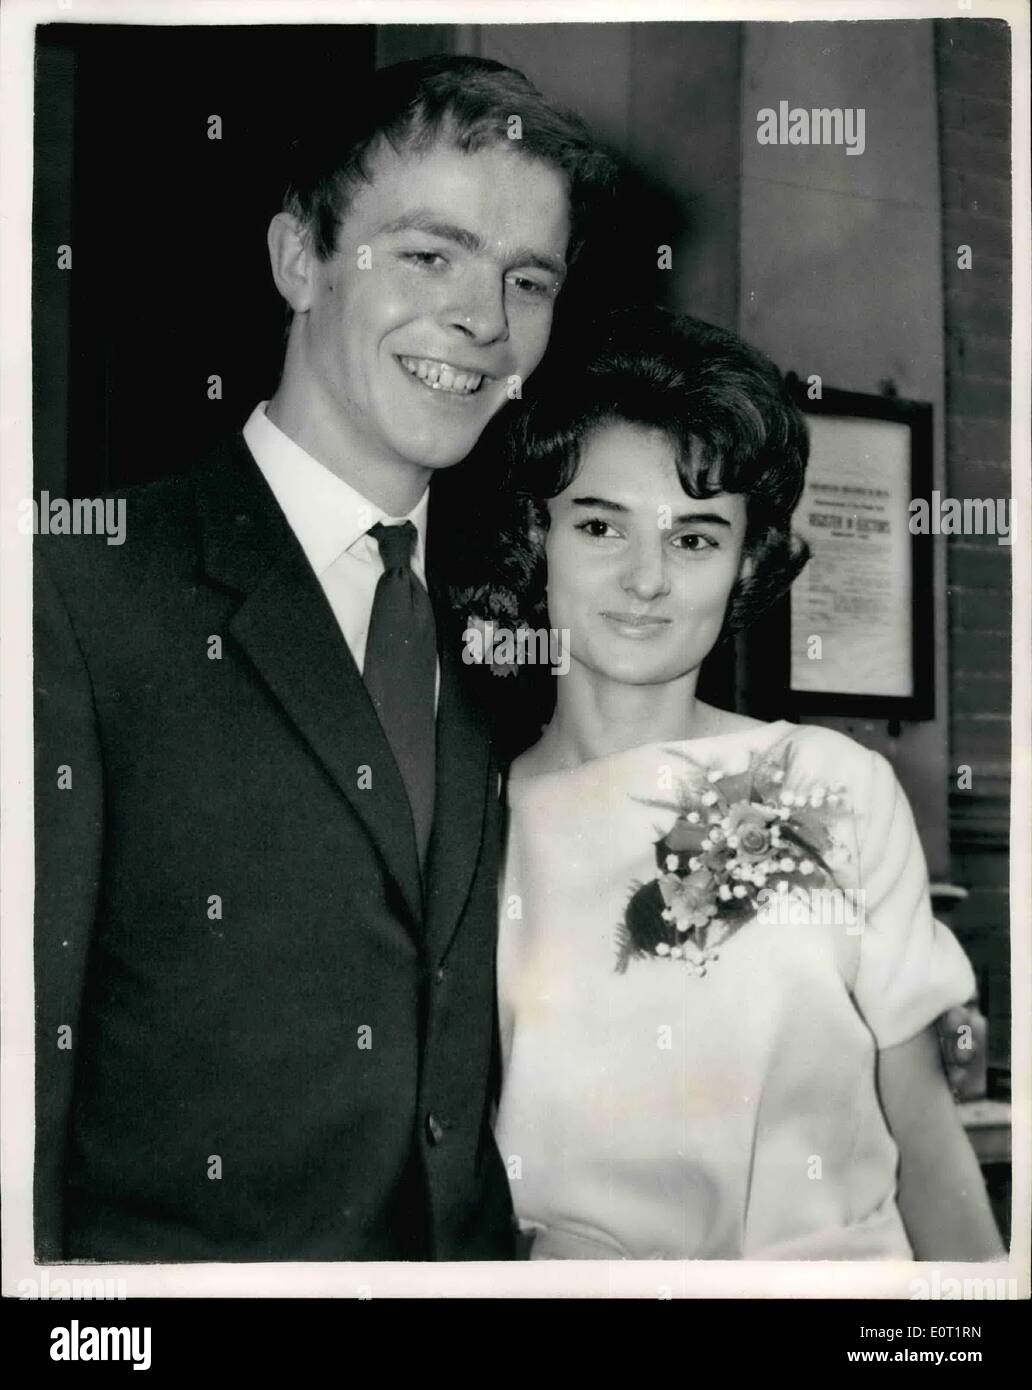 Jul. 07, 1960 - Sir Oswald Mosley's Son Marries: Max Mosley, 20-year-old son of Sir Oswald Mosley, was married today to Jean Taylor, 19-year-old daughter of a City of London policeman, at Chelsea Register Office. Young Mosley is reading physics at Christ Church,Oxford. Photo shows Max Mosley and his bride Jean Taylor pictured after their wedding today. Stock Photo